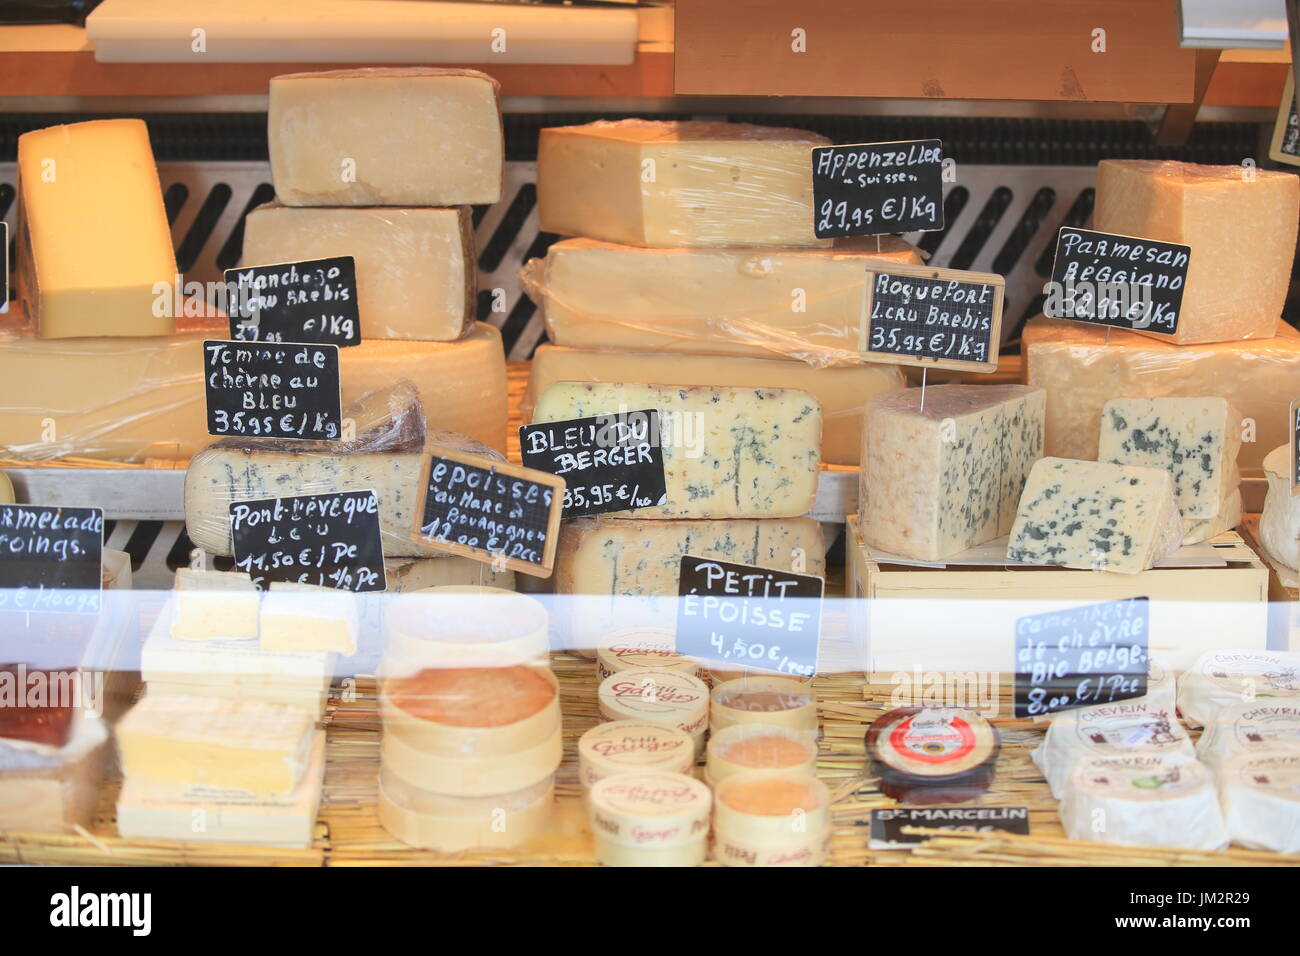 Brussel, Belgium - July 16, 2017: Many sorts of cheese on storefront. Food sales theme. Stock Photo